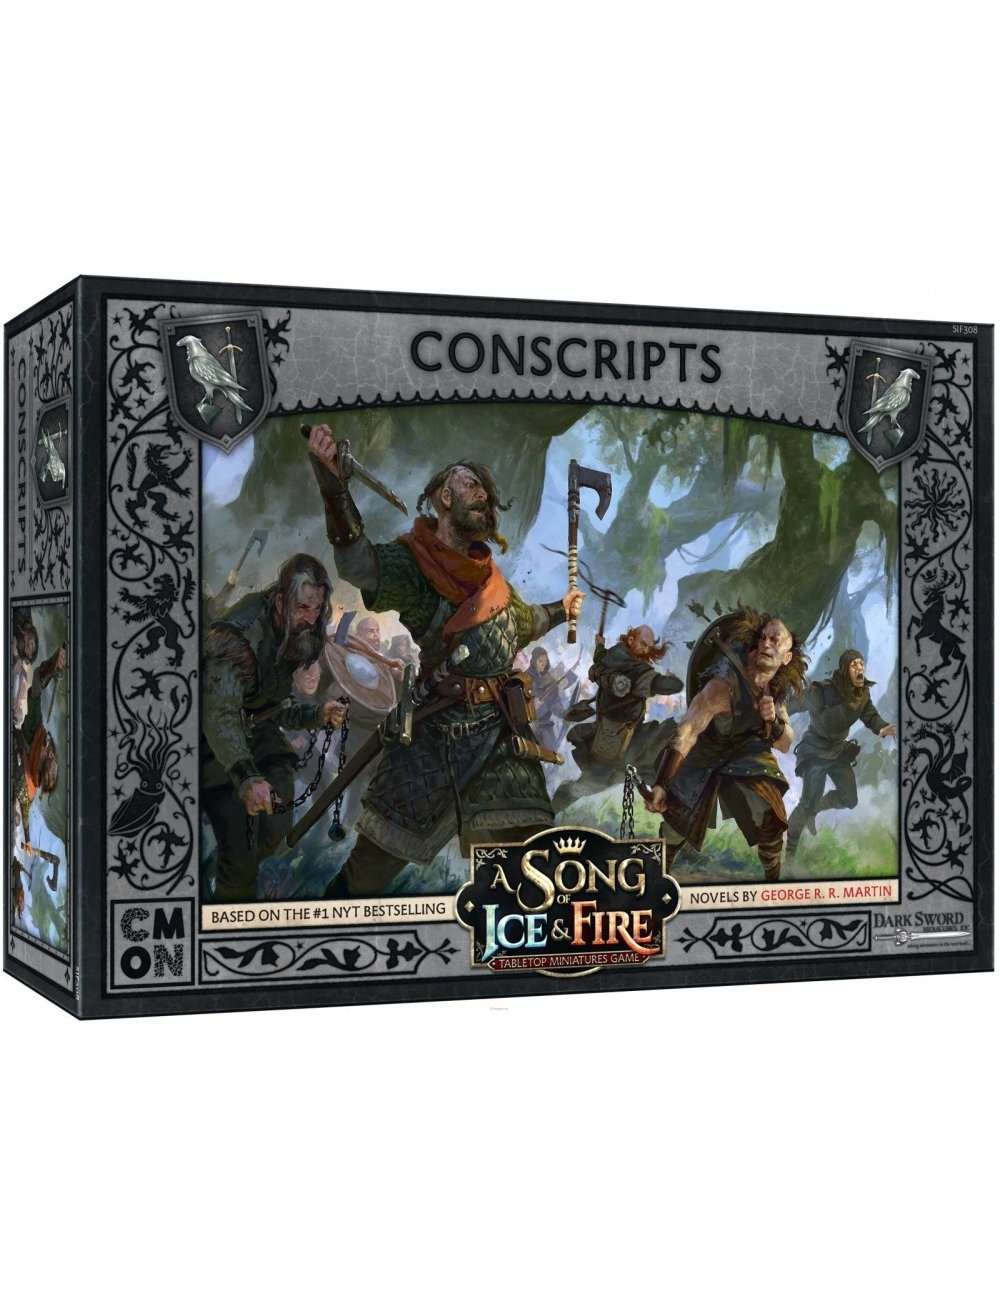 A SONG OF ICE & FIRE: Conscripts